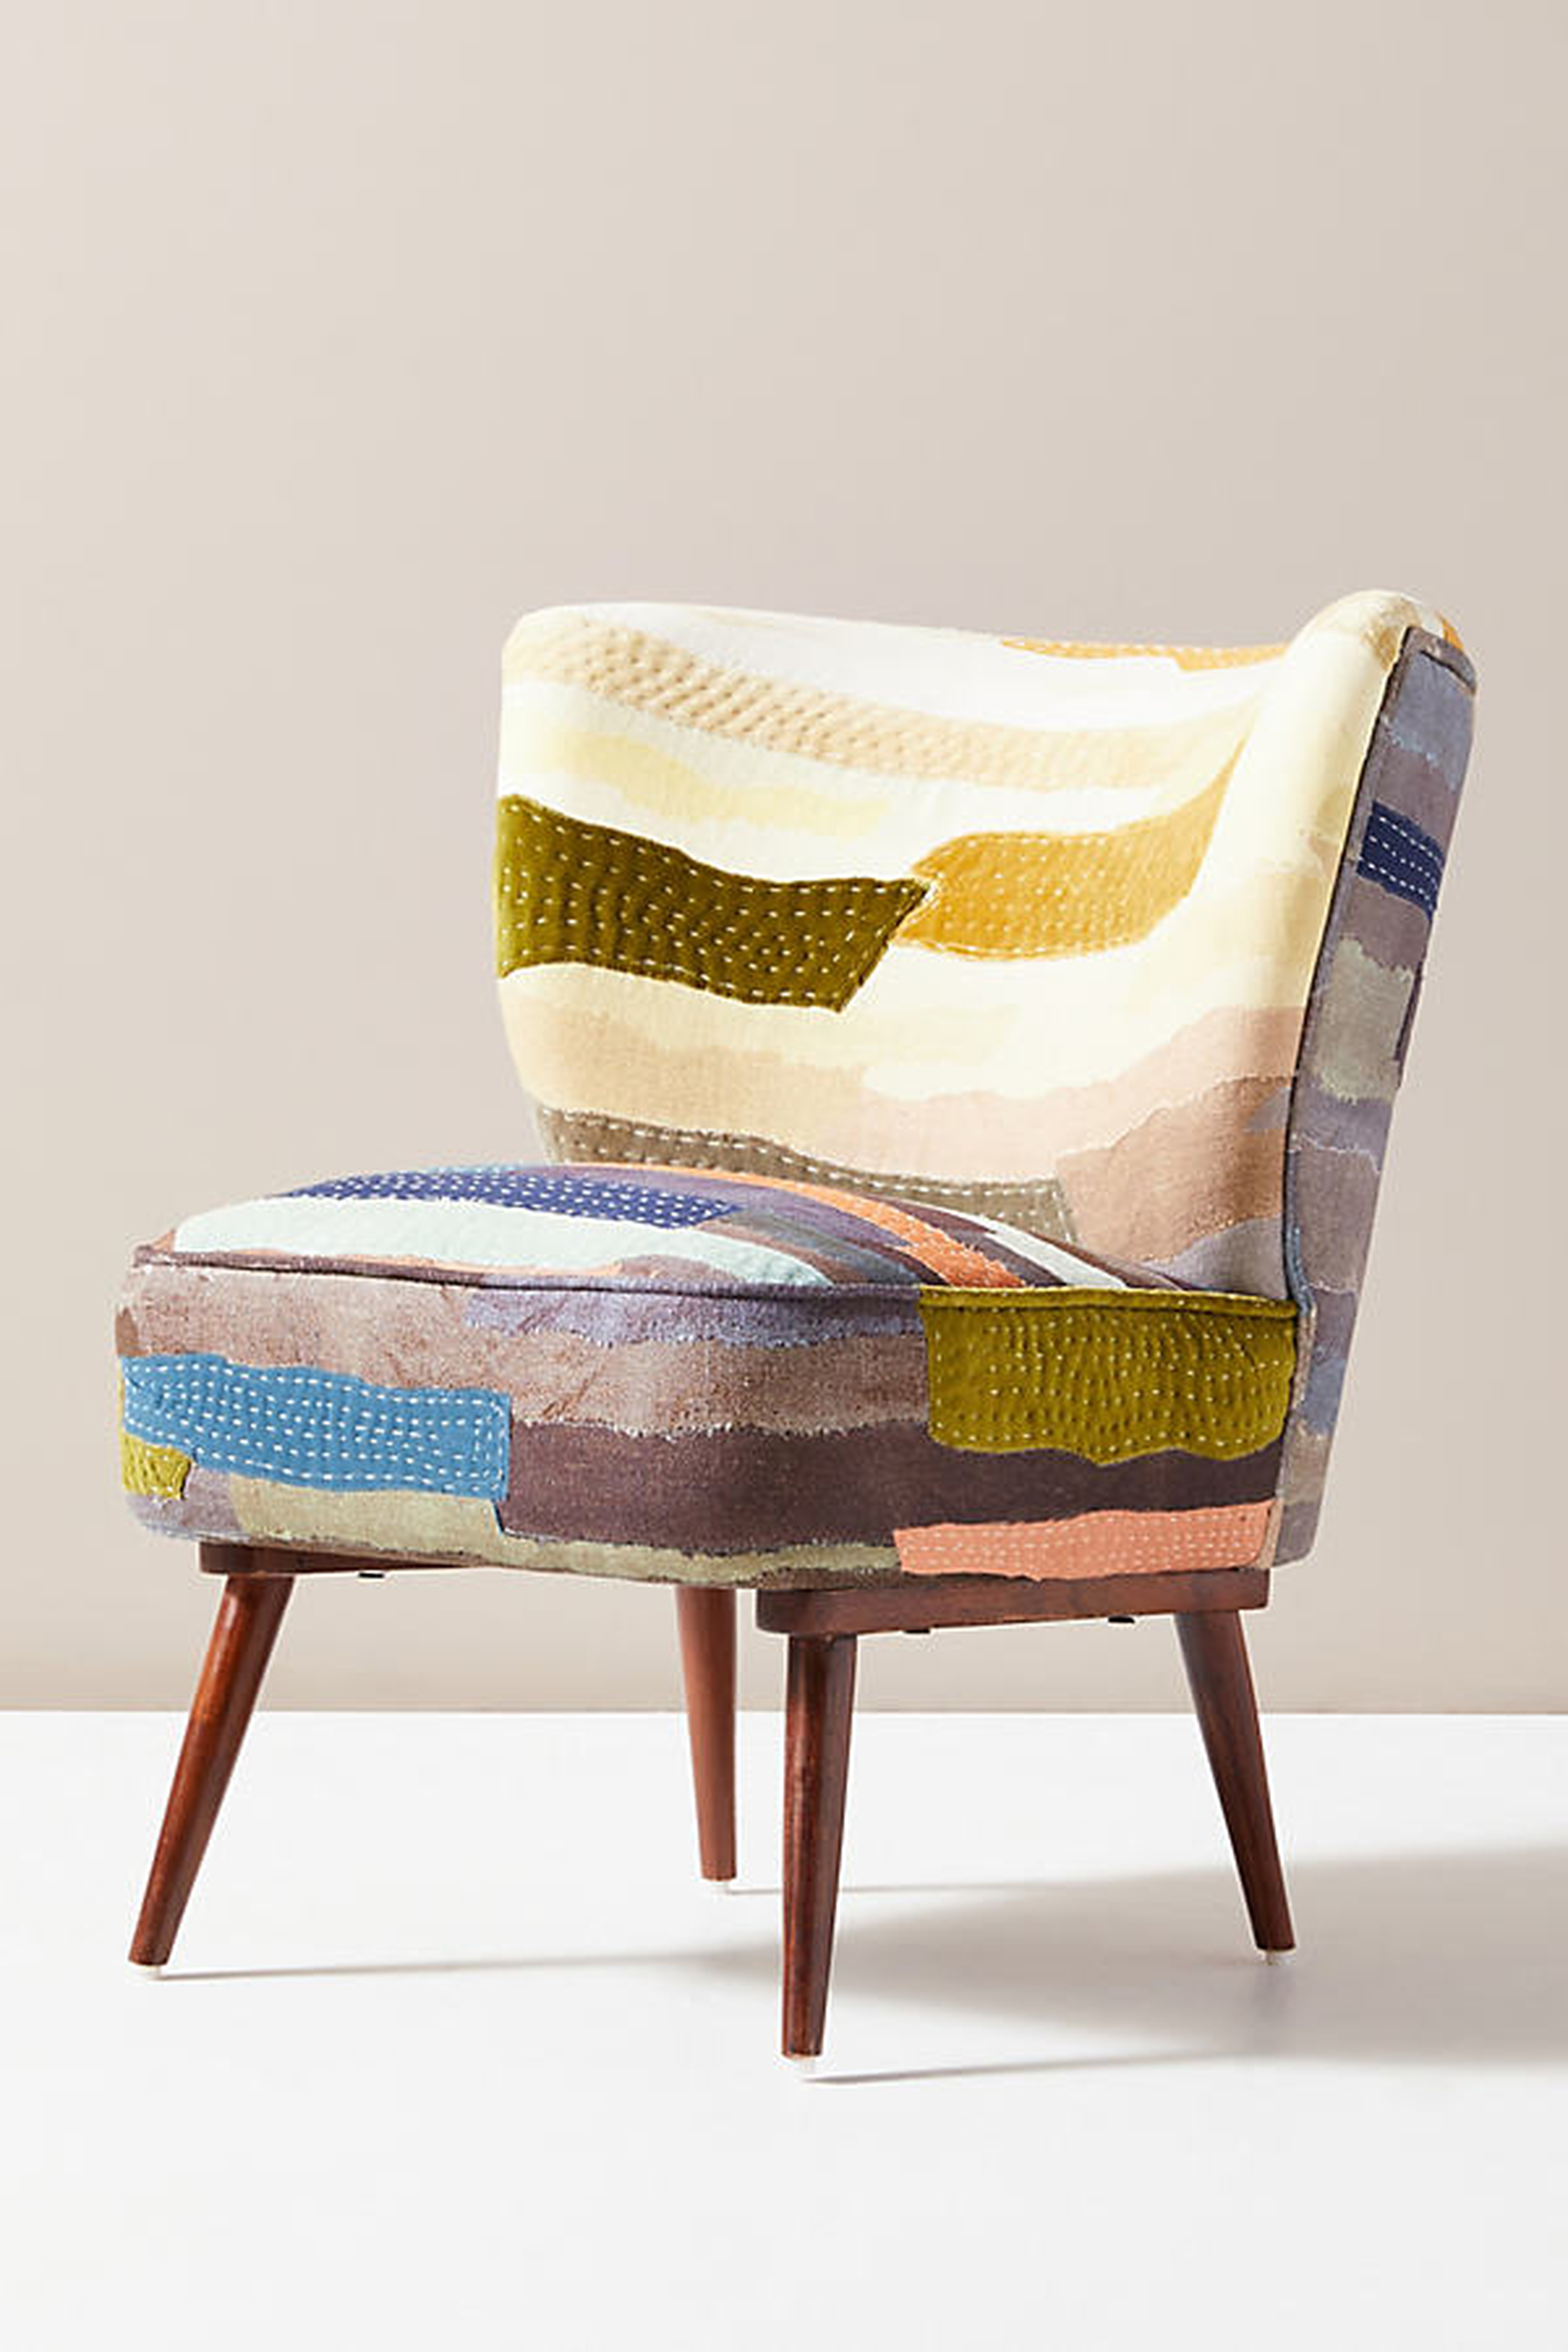 Vivie Patchwork Petite Accent Chair By Anthropologie in Assorted - Anthropologie